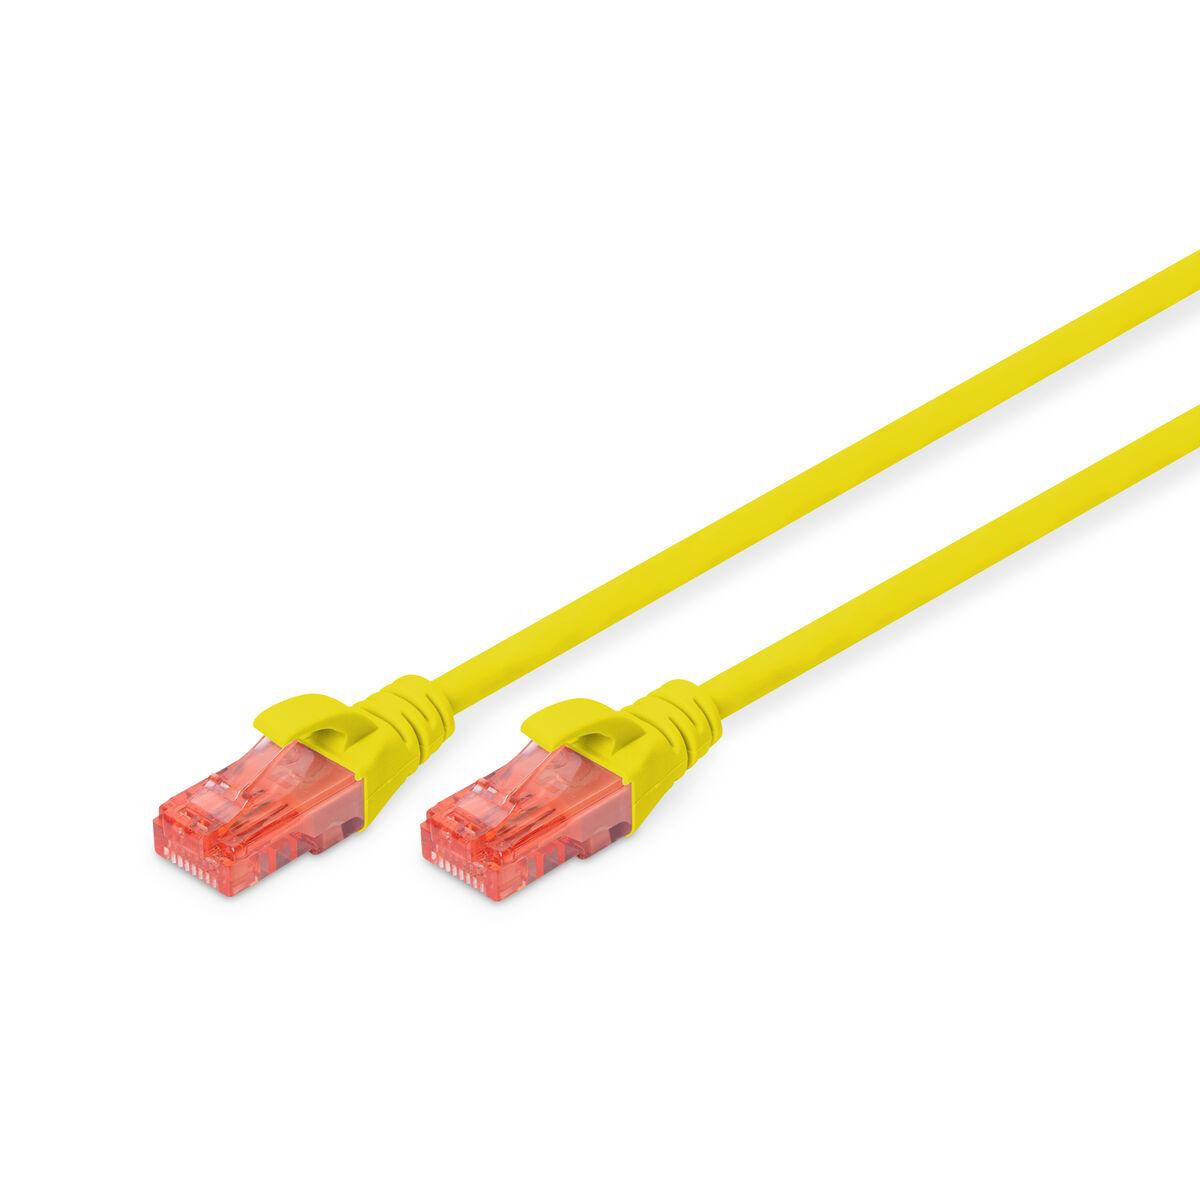 UTP Category 6 Rigid Network Cable Digitus by Assmann DK-1617-050/Y Yellow 5 m